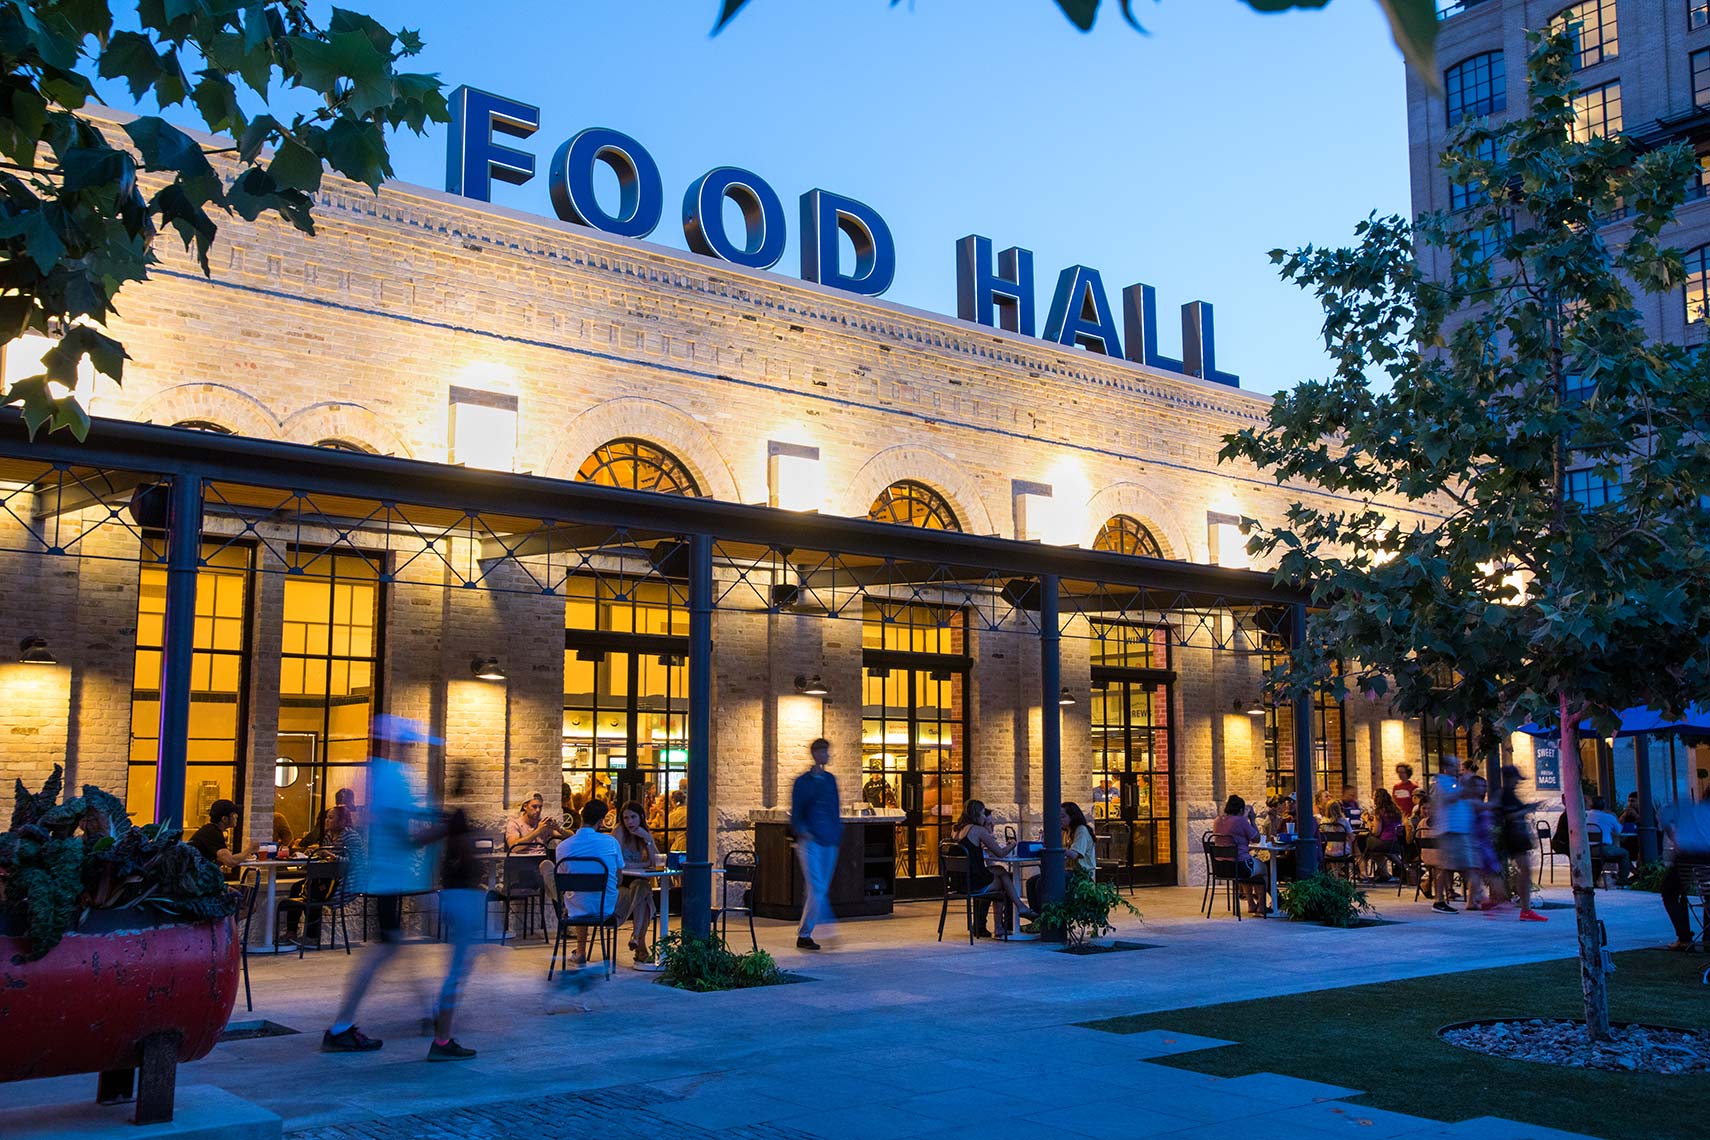 the Food Hall at the Pearl in San Antonio by Best Texas Travel Photographer Shannon O